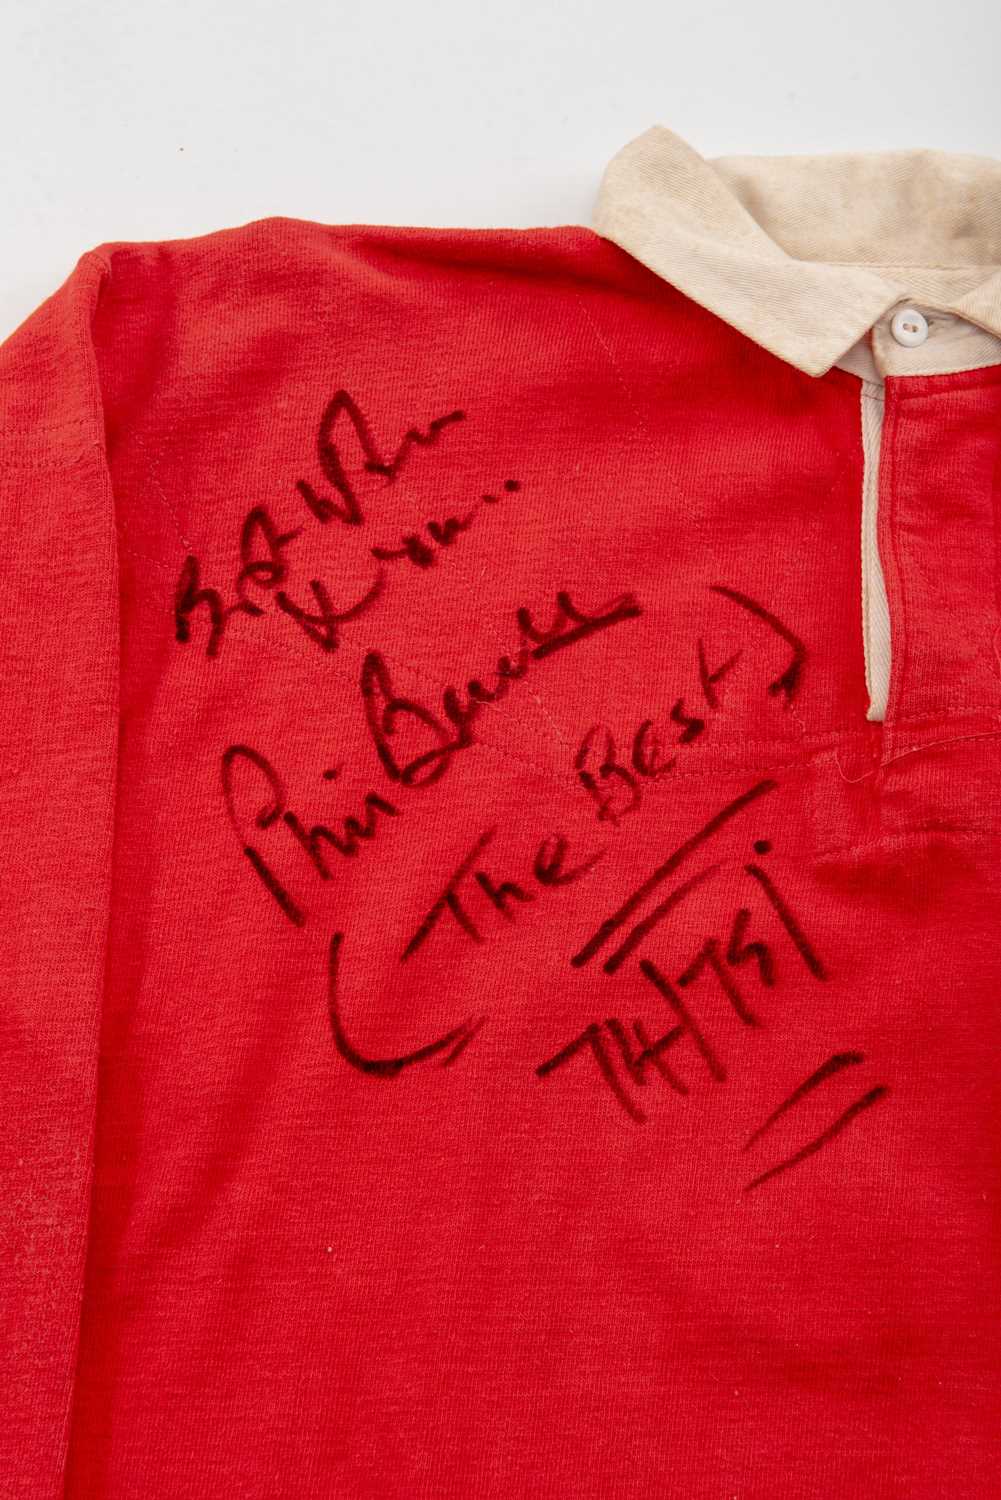 PHIL BENNETT | LLANELLI RFC 1974/75 Llanelli Rugby Union red jersey with white collar believed to be - Image 2 of 4